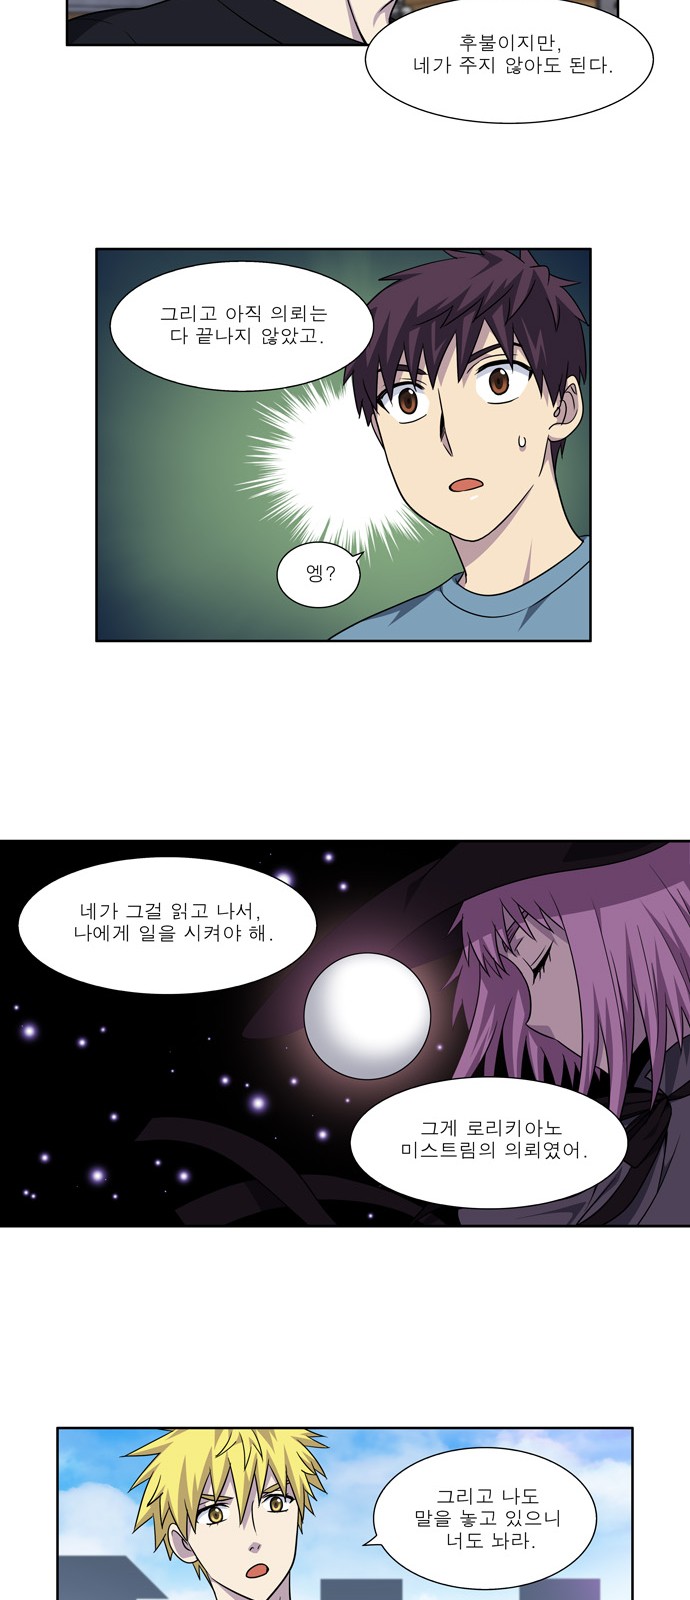 The Gamer - Chapter 279 - Page 5